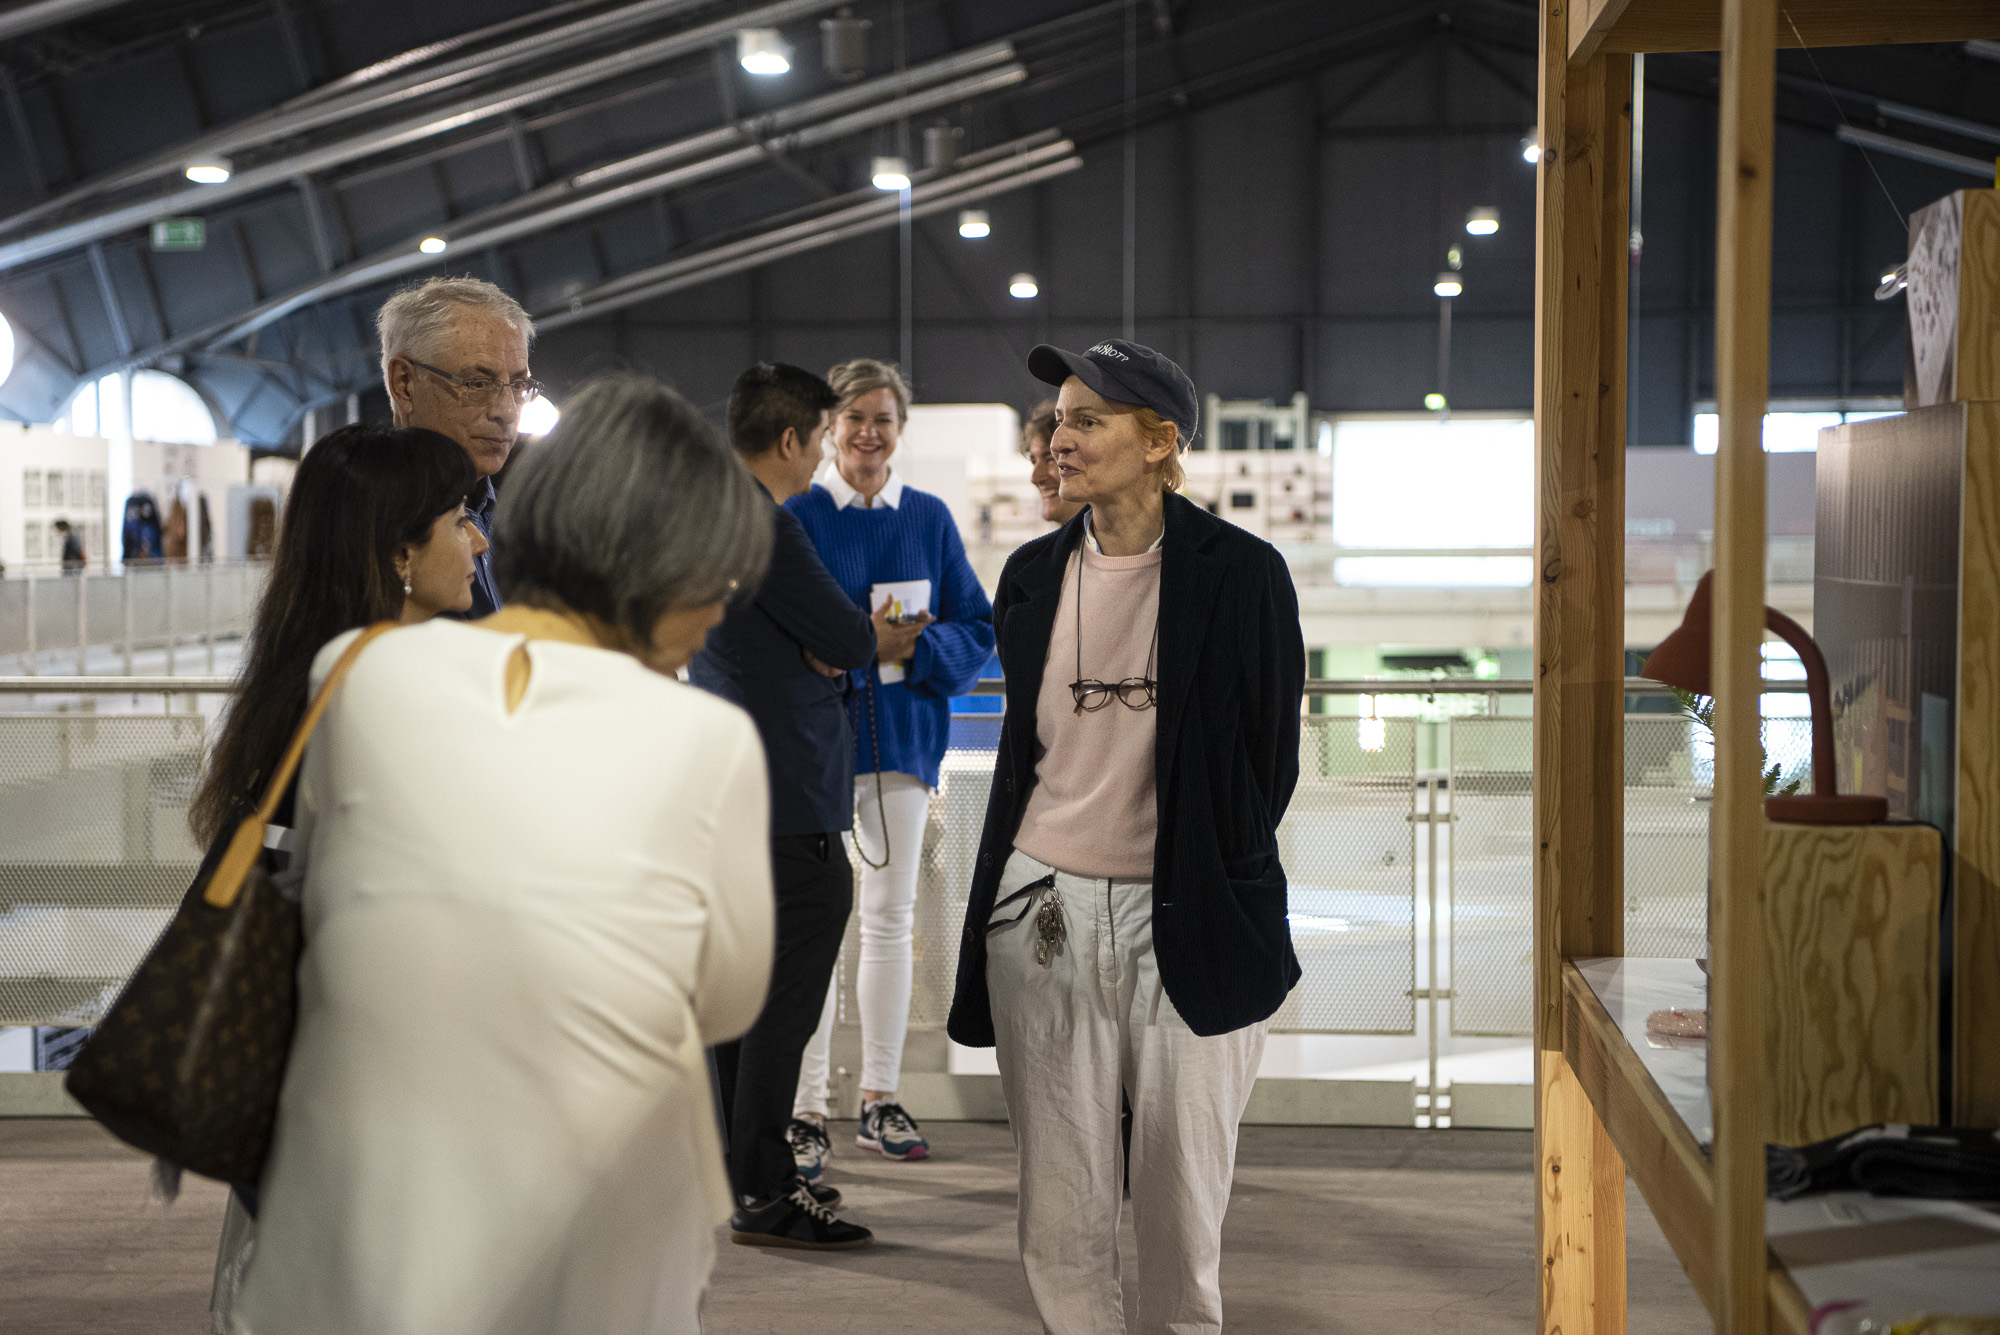 Official tour with Aric Chen (Artistic Director Design Miami Basel) and Jörg Boner (President of the Federal Design Commission)